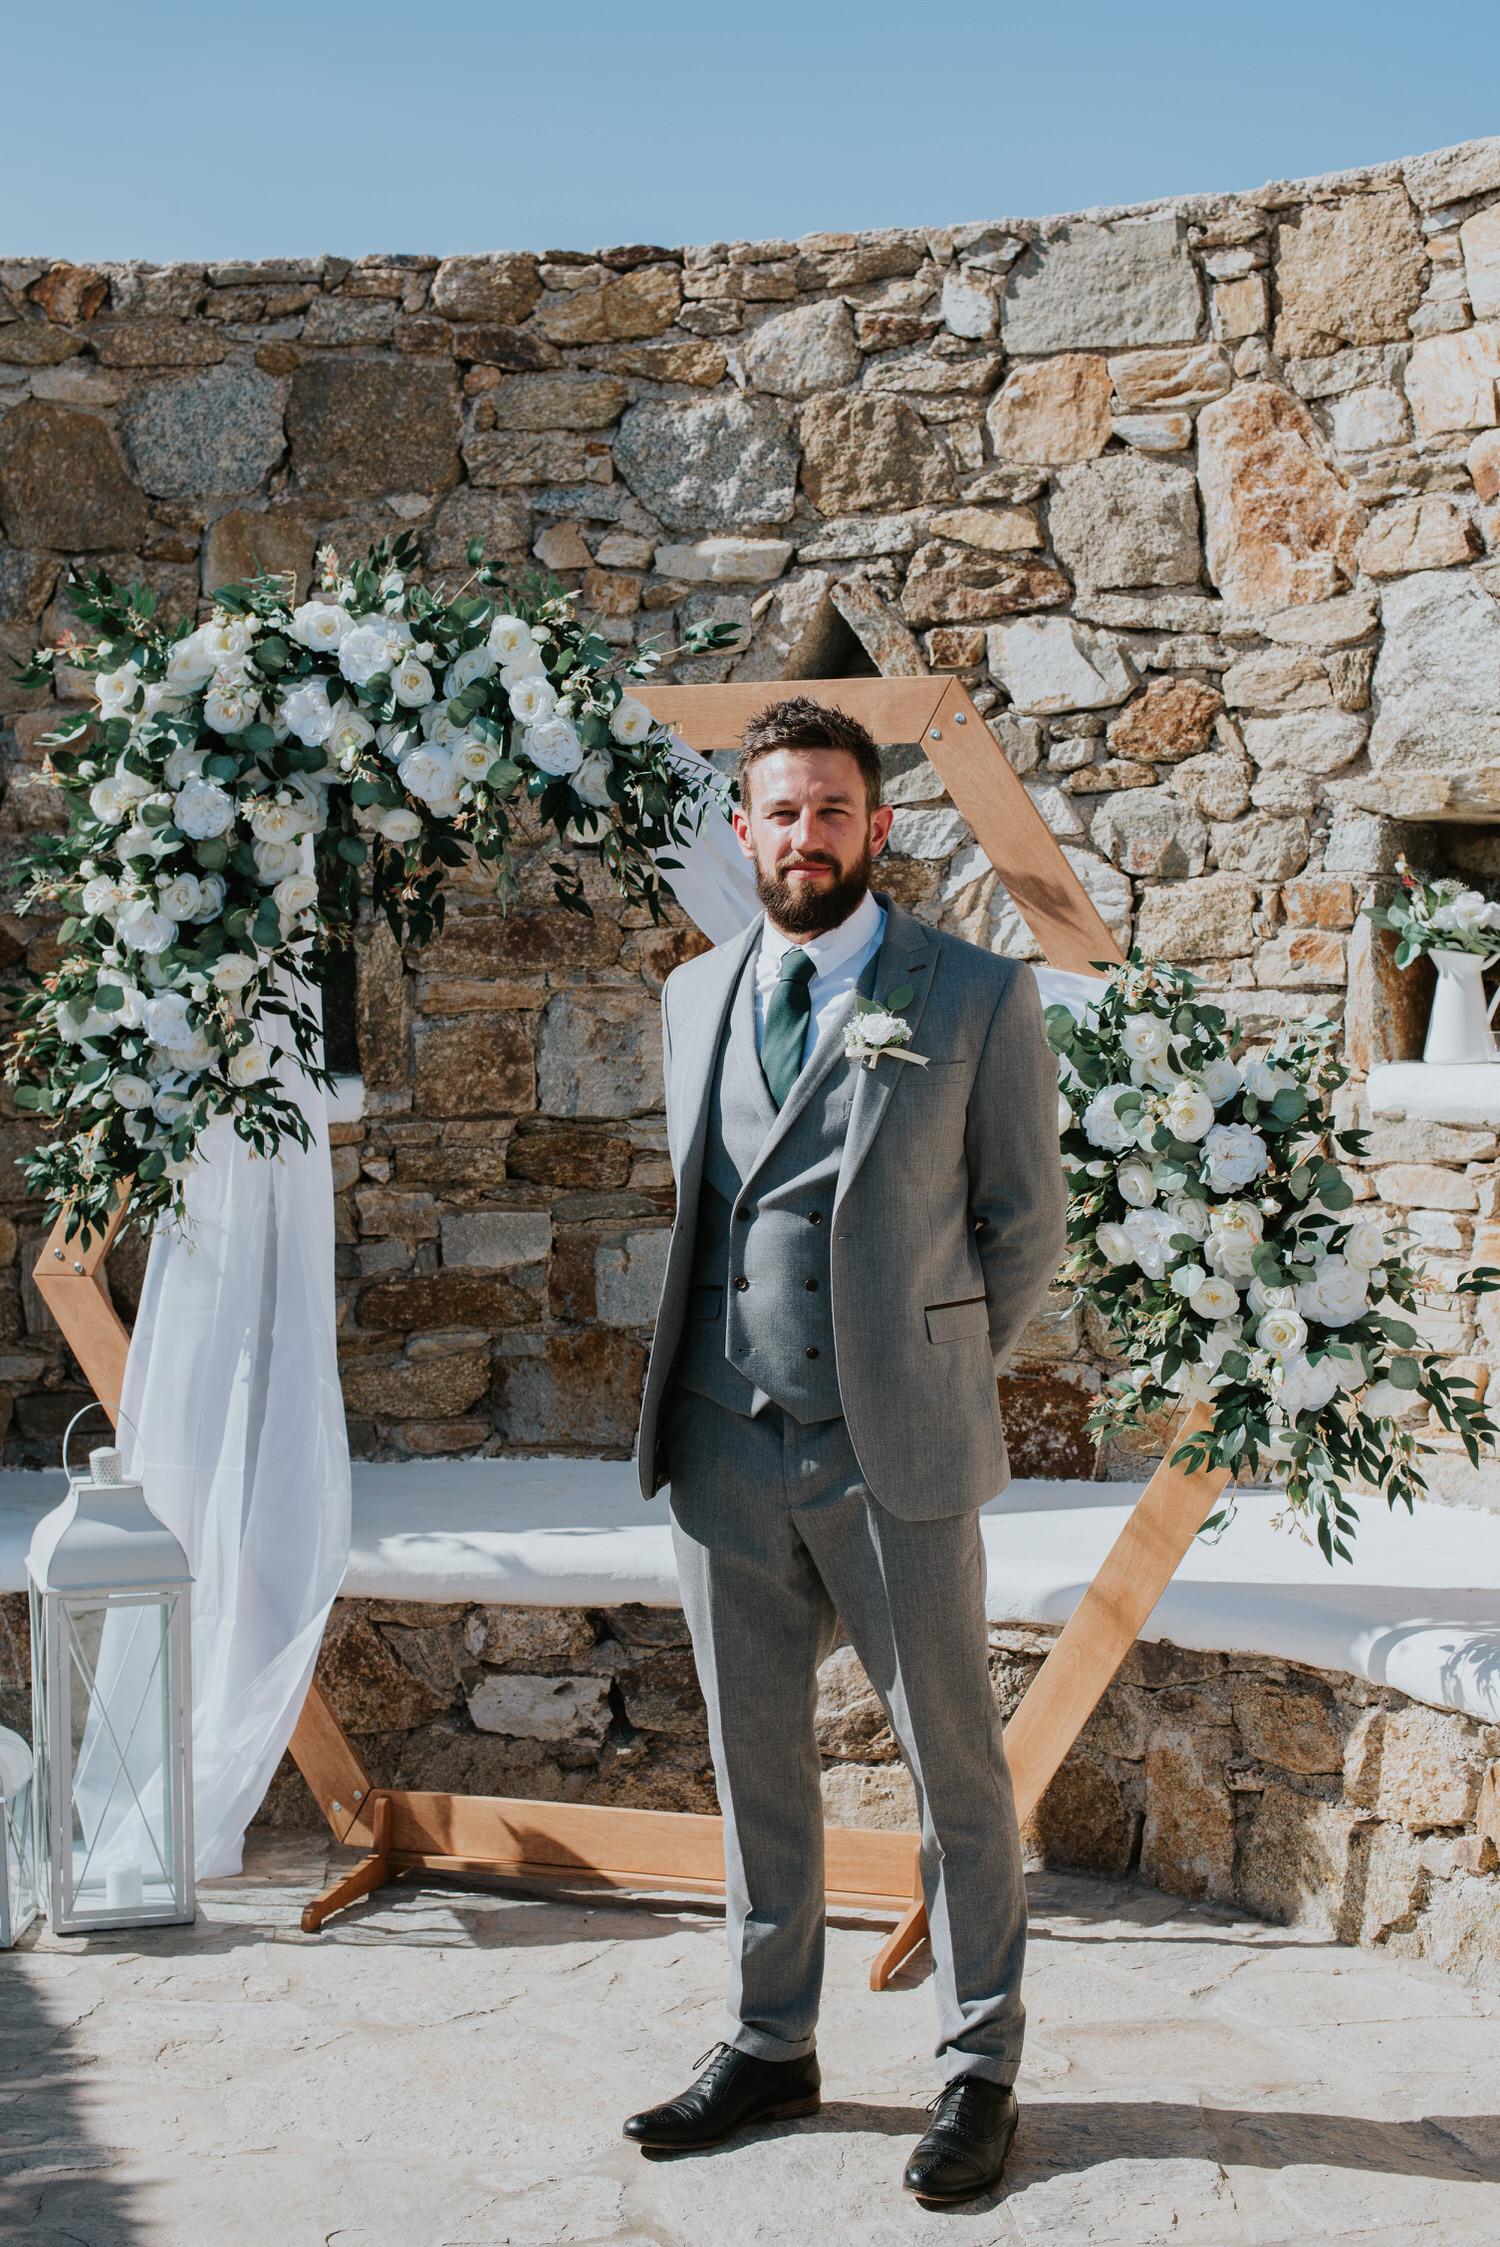 Mykonos wedding photographer: groom looking handsome standing in front of the floral arch.